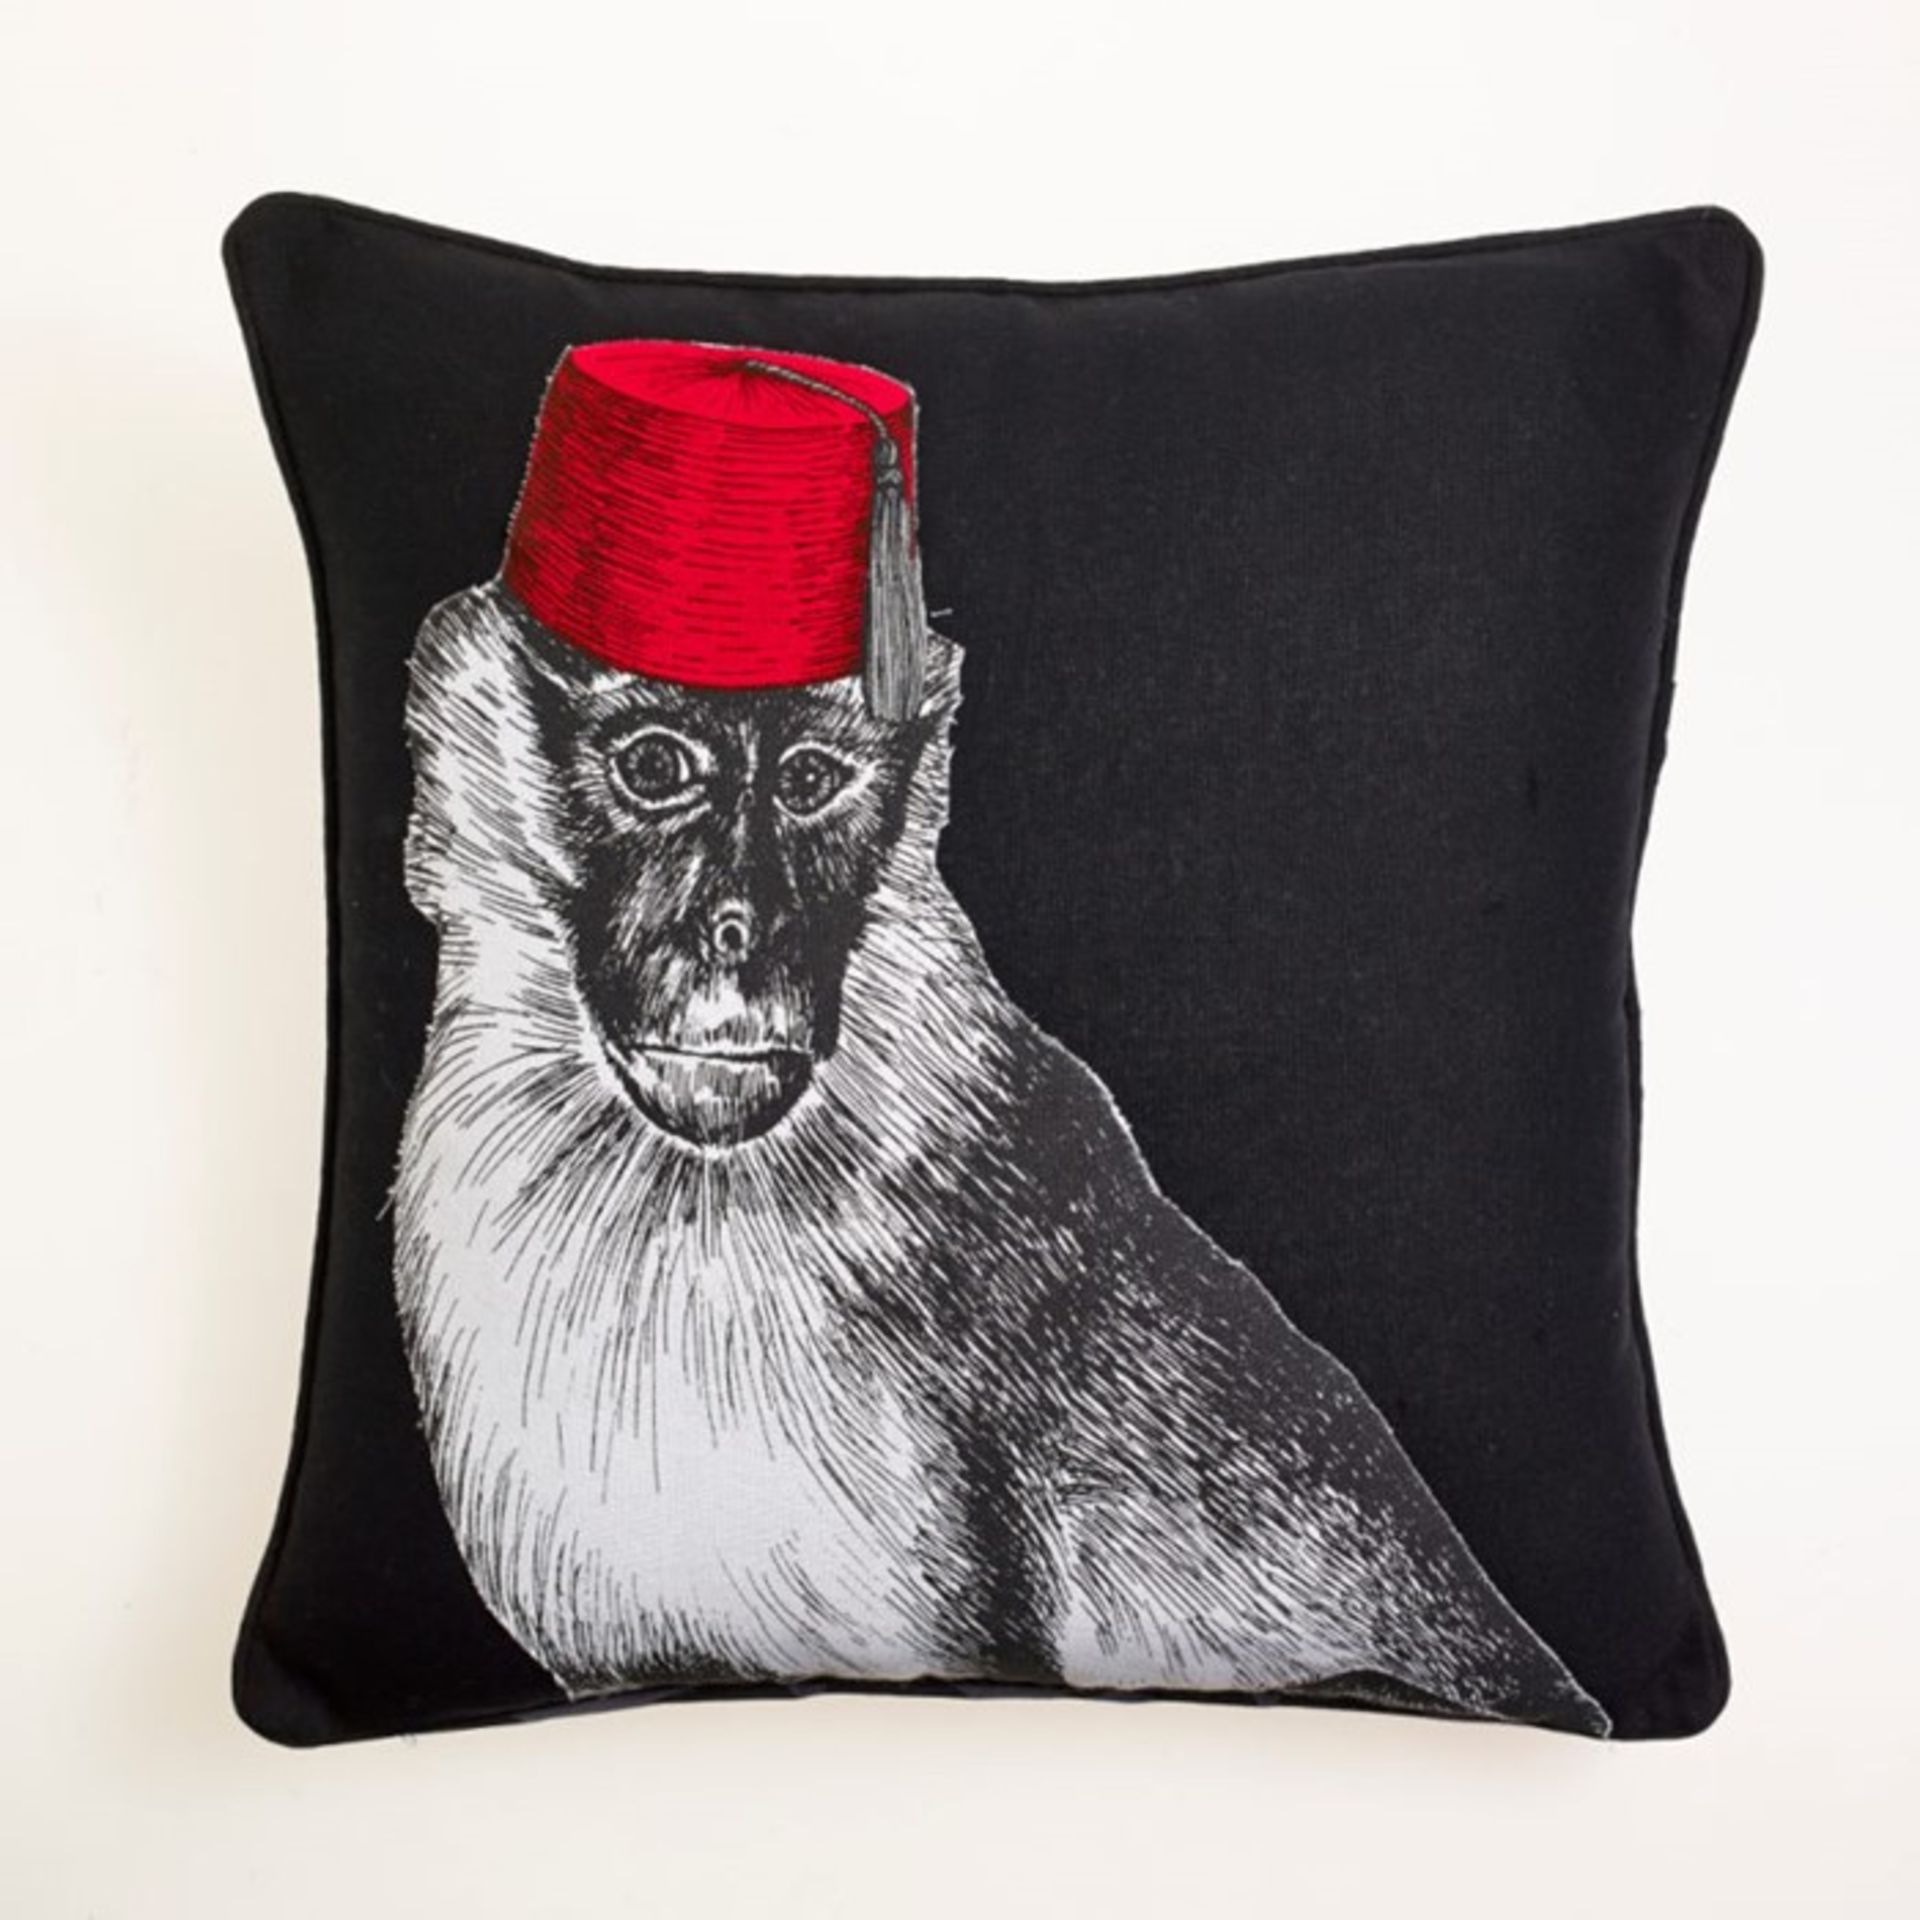 1 BRAND NEW PACKAGED ARTHOUSE MONKEY MADNESS BLACK AND RED CUSHION 300123 (VIEWING HIGHLY